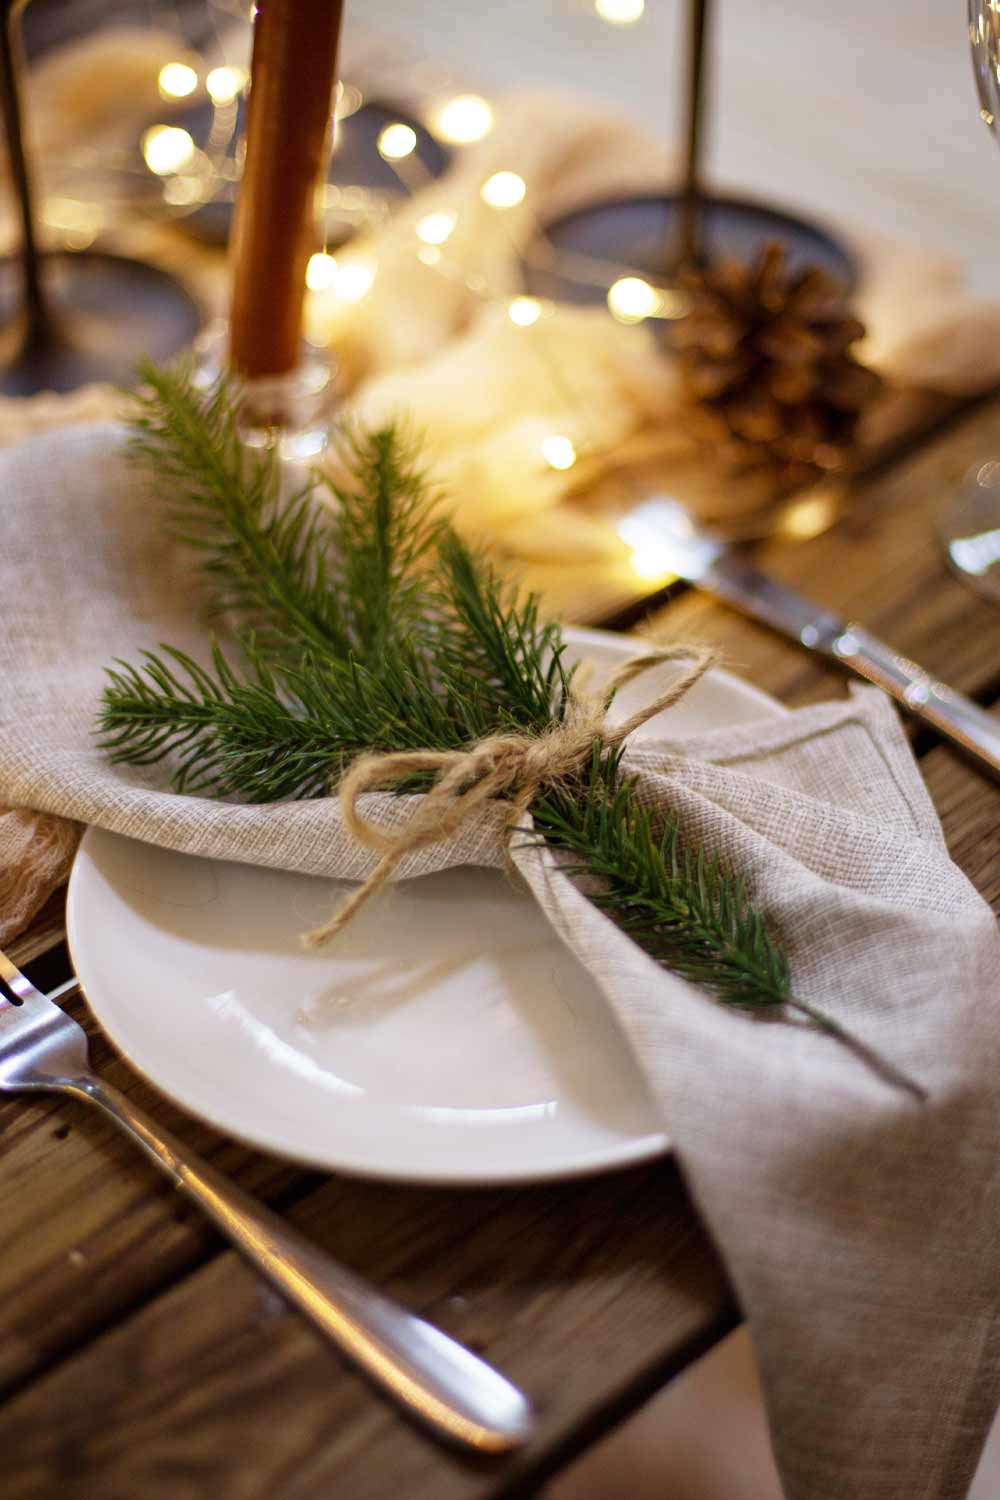 Napkin Ring with Christmas Tree Branch